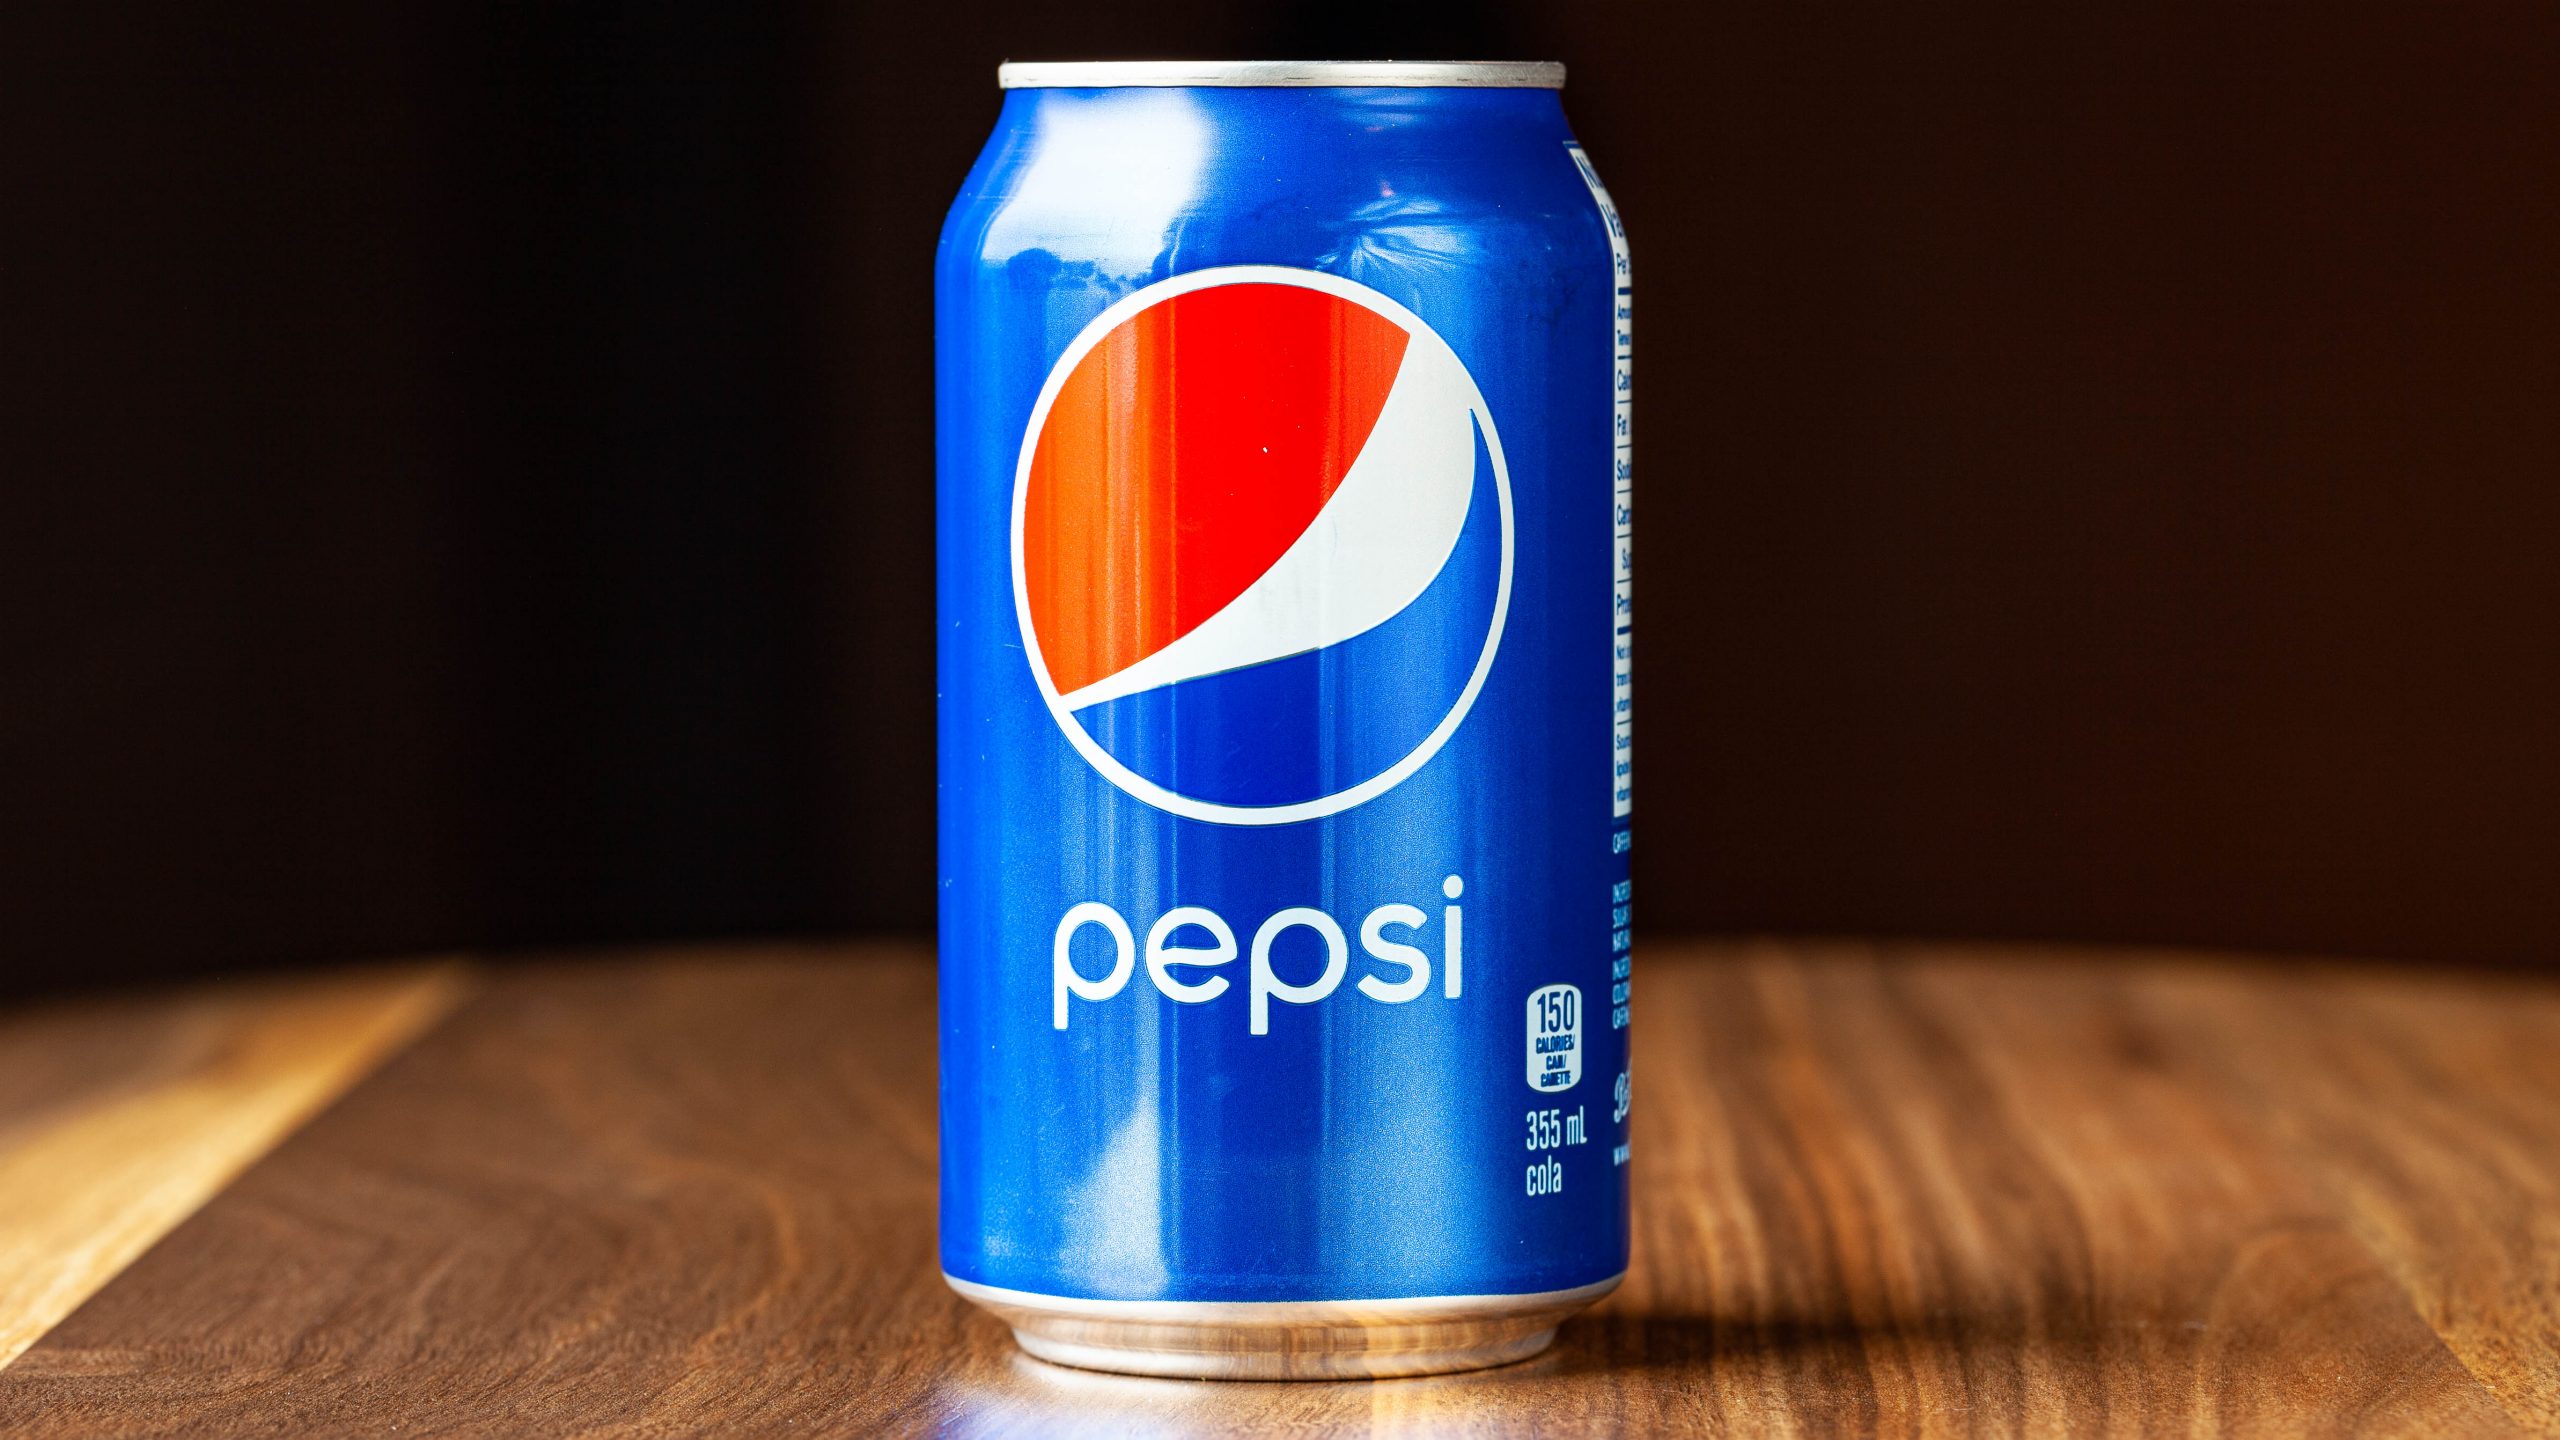 A 355-mL can of Pepsi cola.